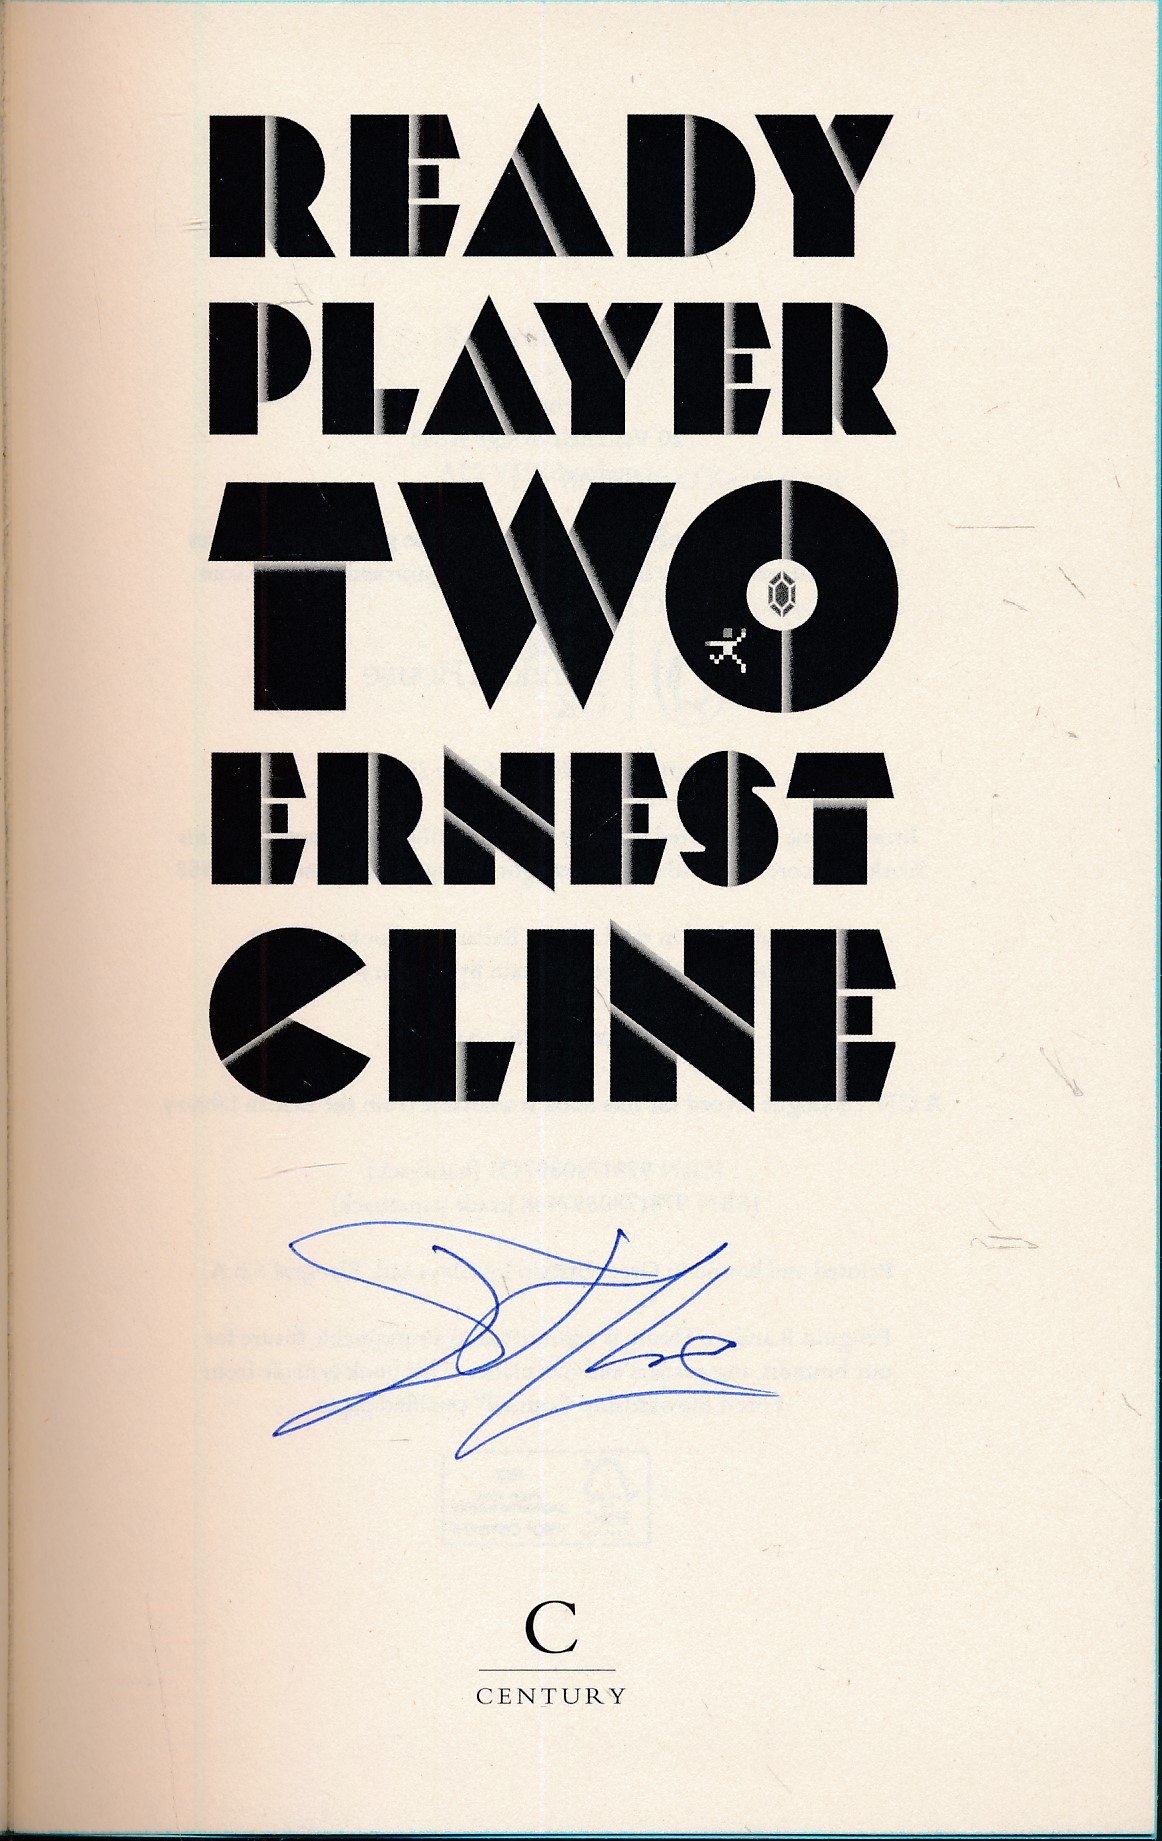 Ready Player Two. Signed copy.